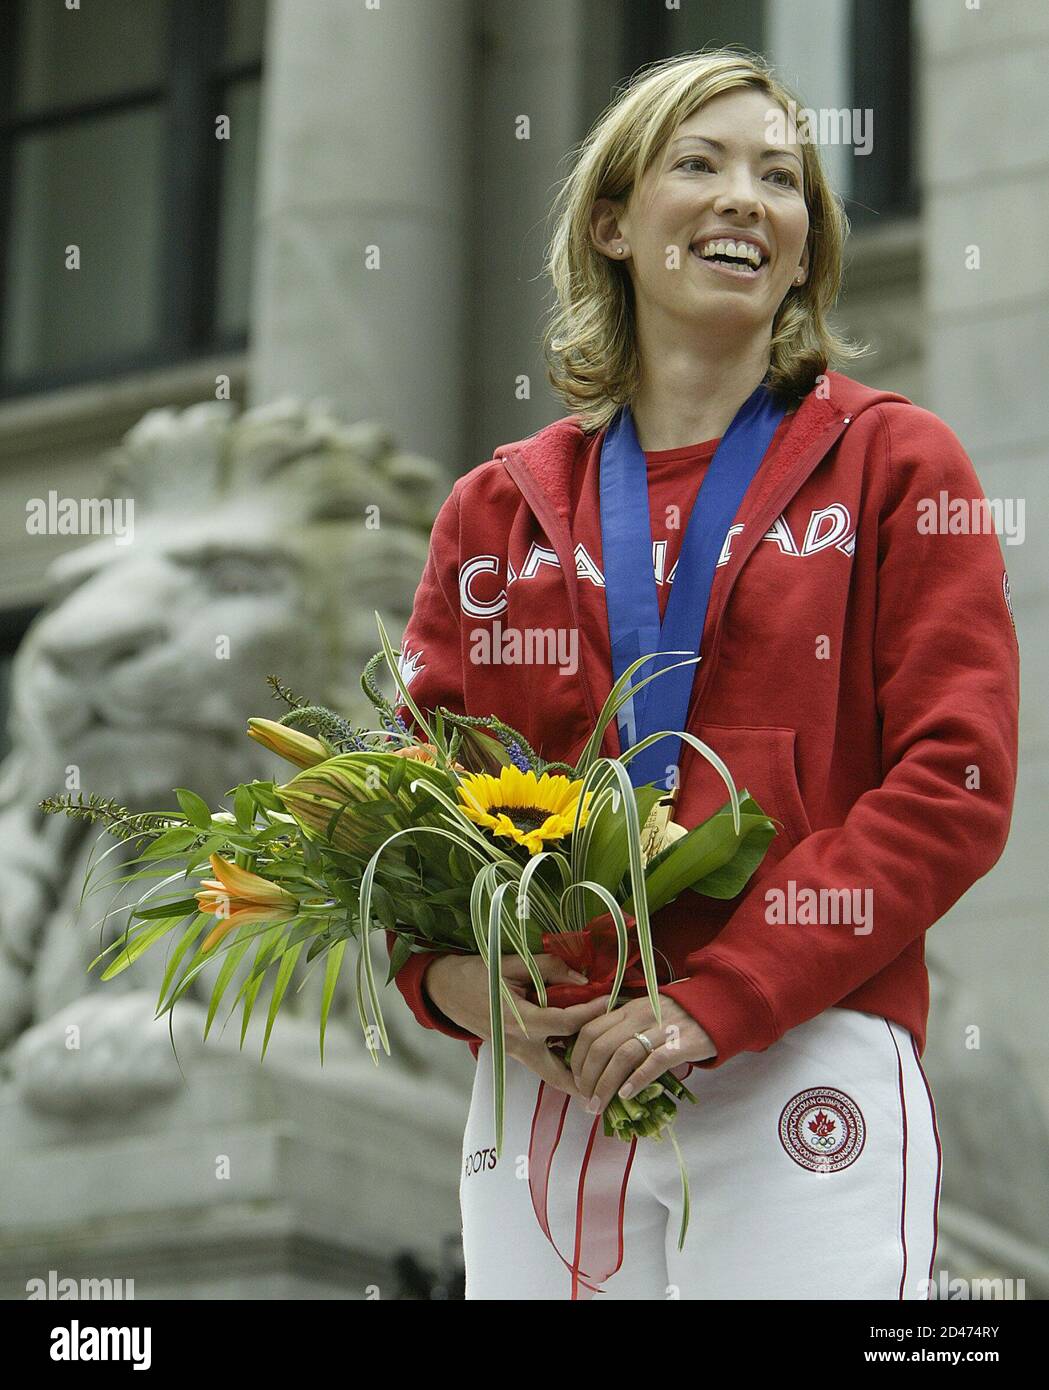 Skier Beckie Scott poses after receiving the gold medal for the 2002  Olympic Winter Games five-kilometer pursuit, at a ceremony in Vancouver  British Columbia, June 25, 2004. Scott, who took the bronze